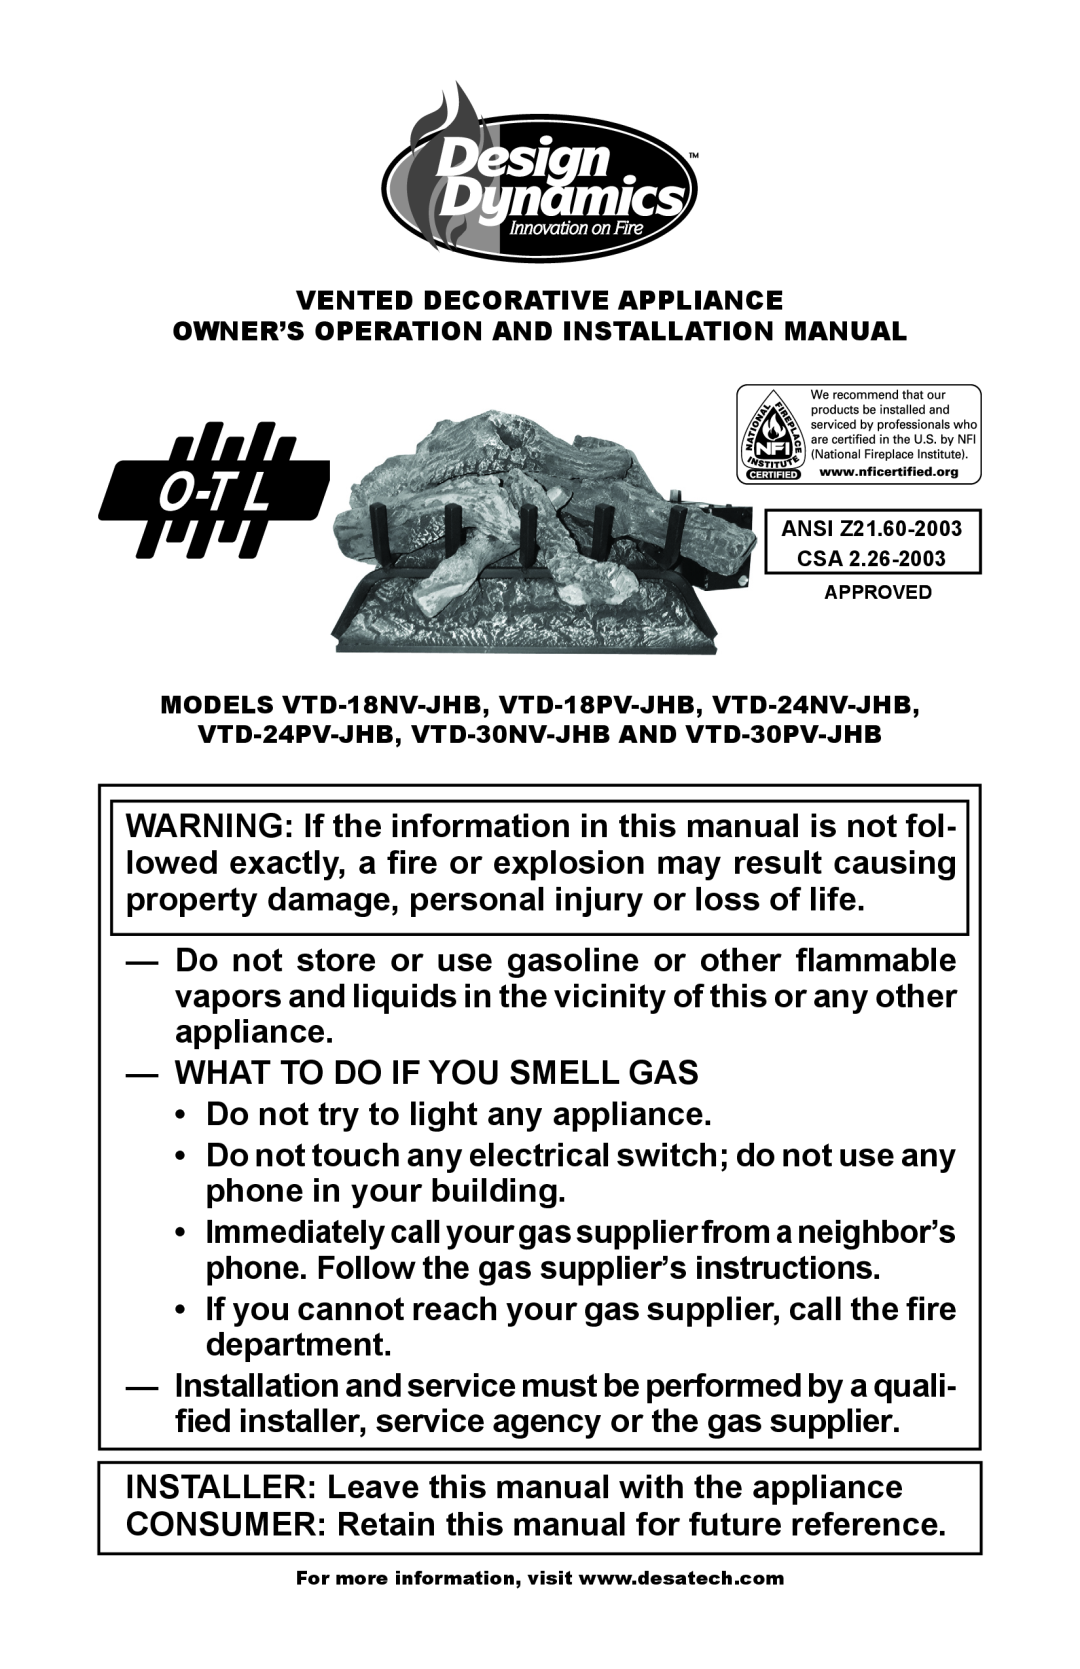 Desa VTD-30PV-JHB, VTD-30NV-JHB, VTD-24PV-JHB, VTD-24NV-JHB, VTD-18NV-JHB installation manual What To Do If You Smell Gas 